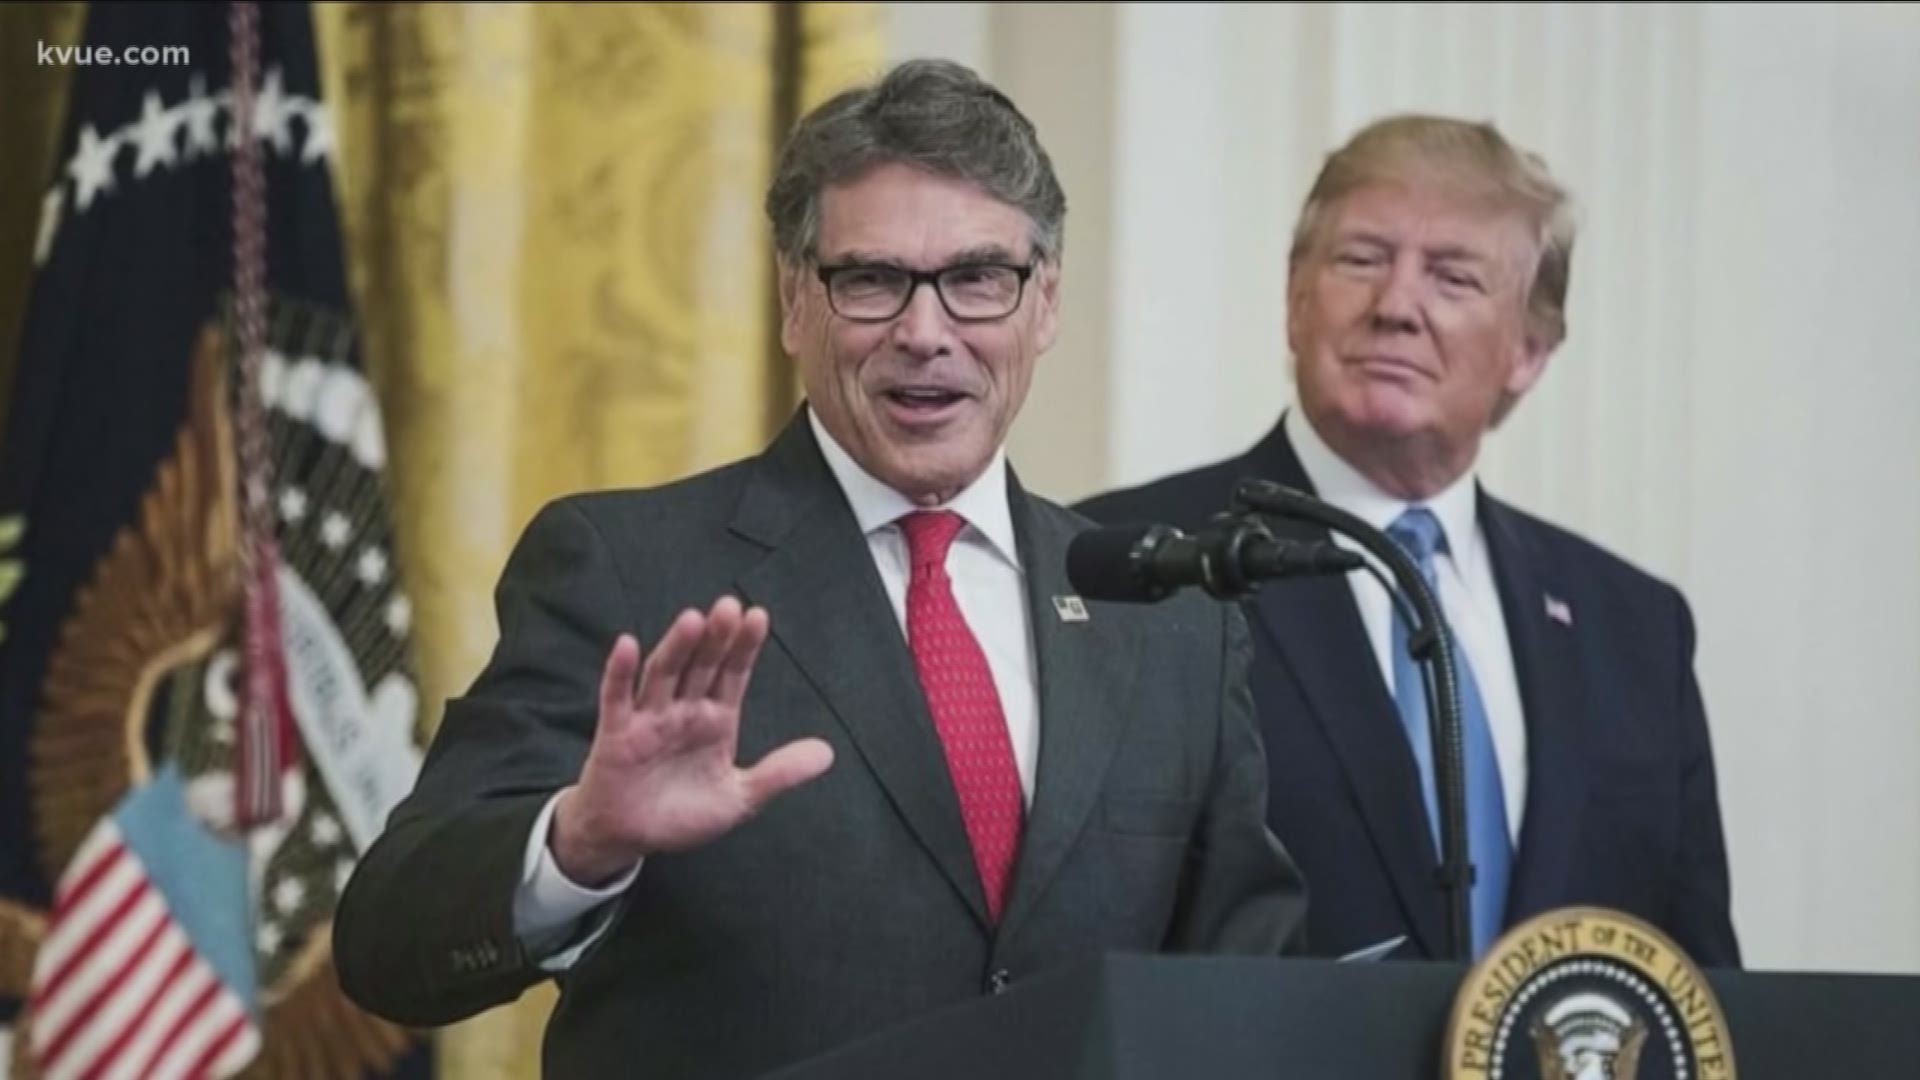 Former Texas Gov. Rick Perry is leaving Washington after spending two years as President Donald Trump's energy secretary.